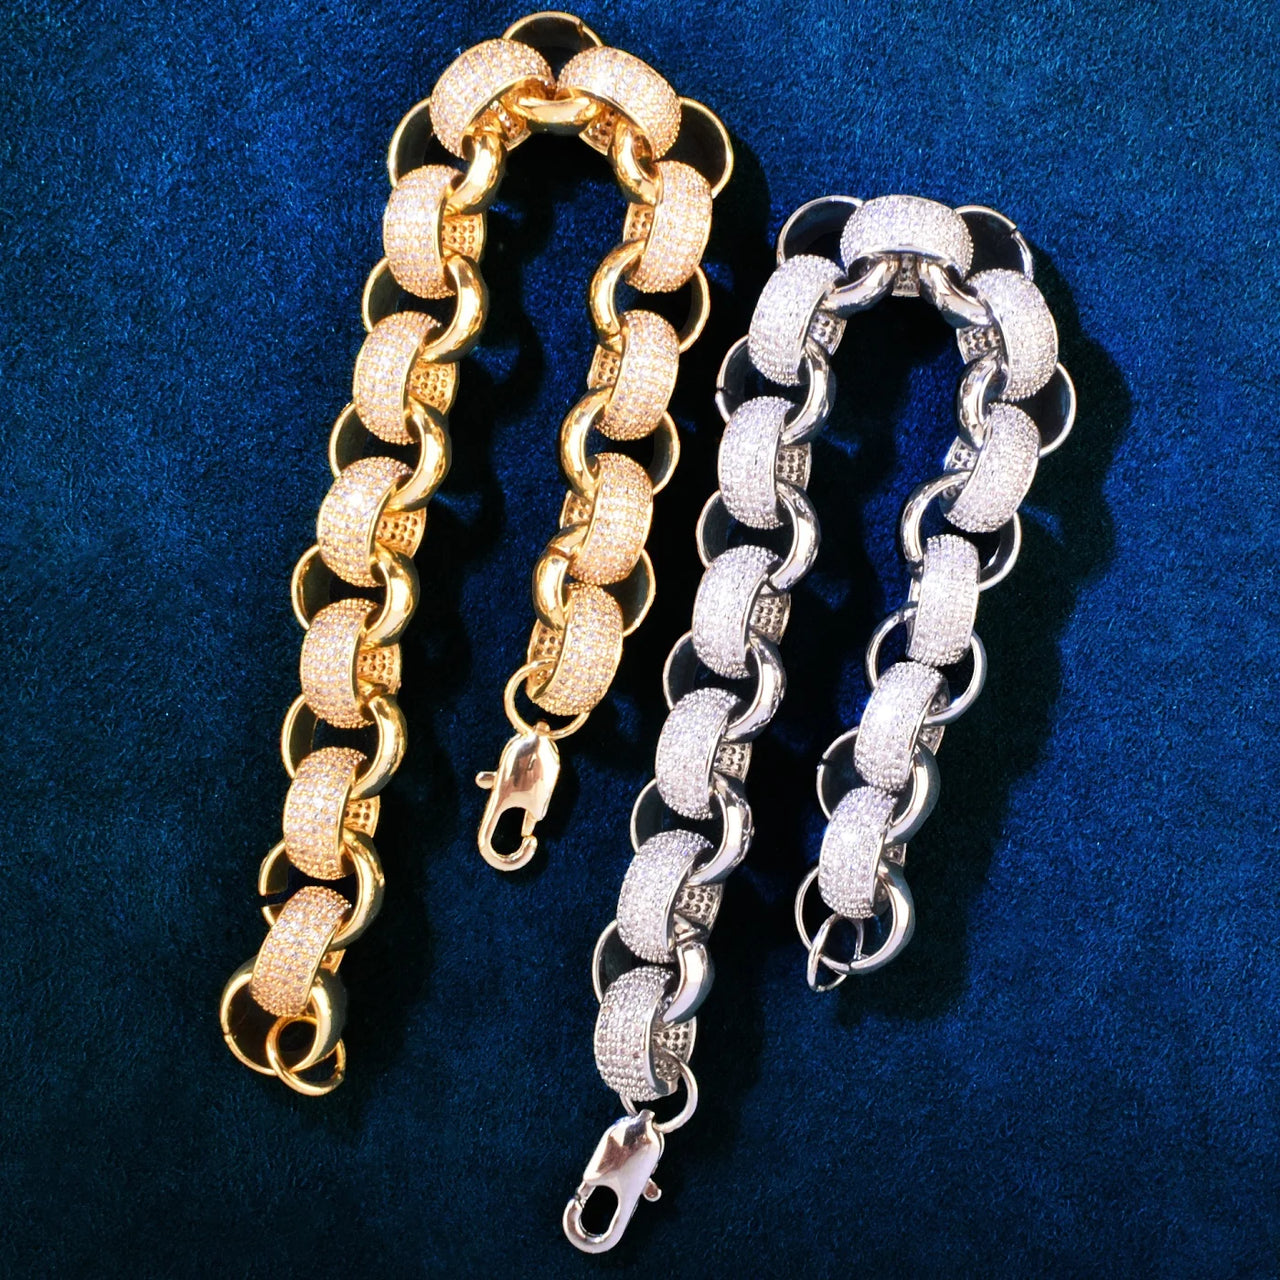 10mm Small Rolo Link Bracelet - Different Drips